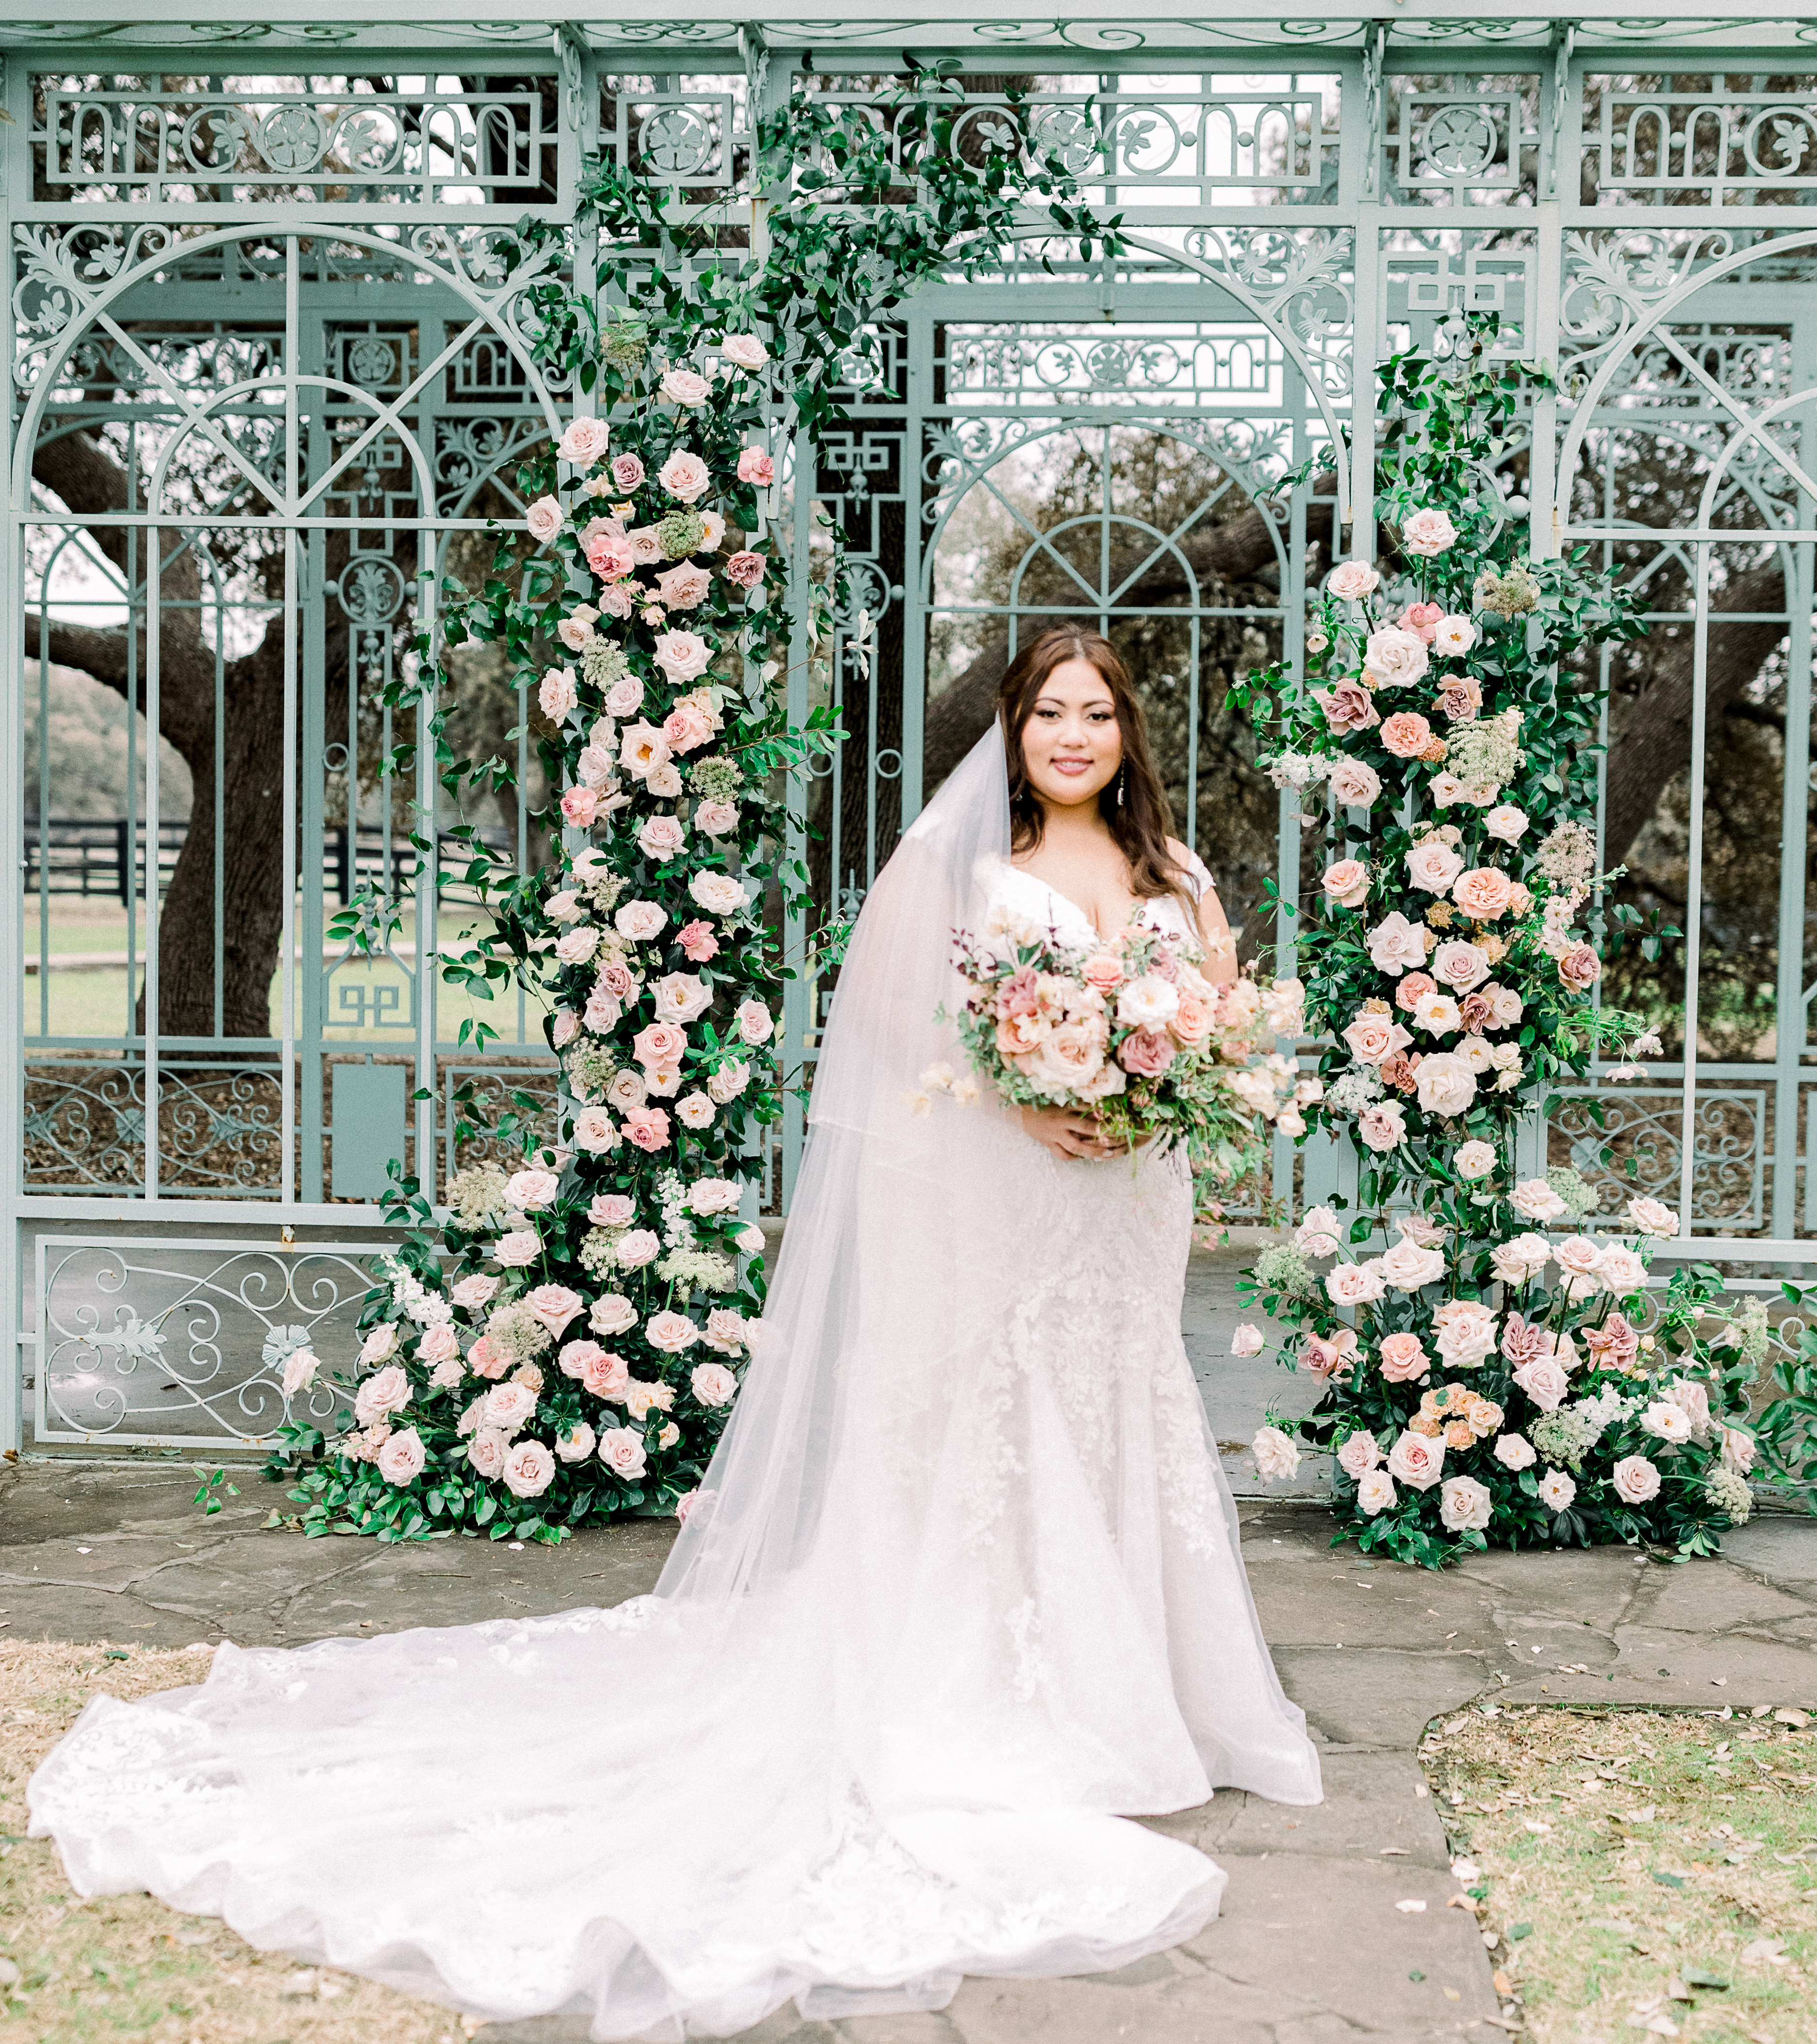 Bride holding fresh bouquet of pink, cream and white florals in front of an antique french gazebo at her outdoor wedding ceremony in Dripping Springs, Texas. 